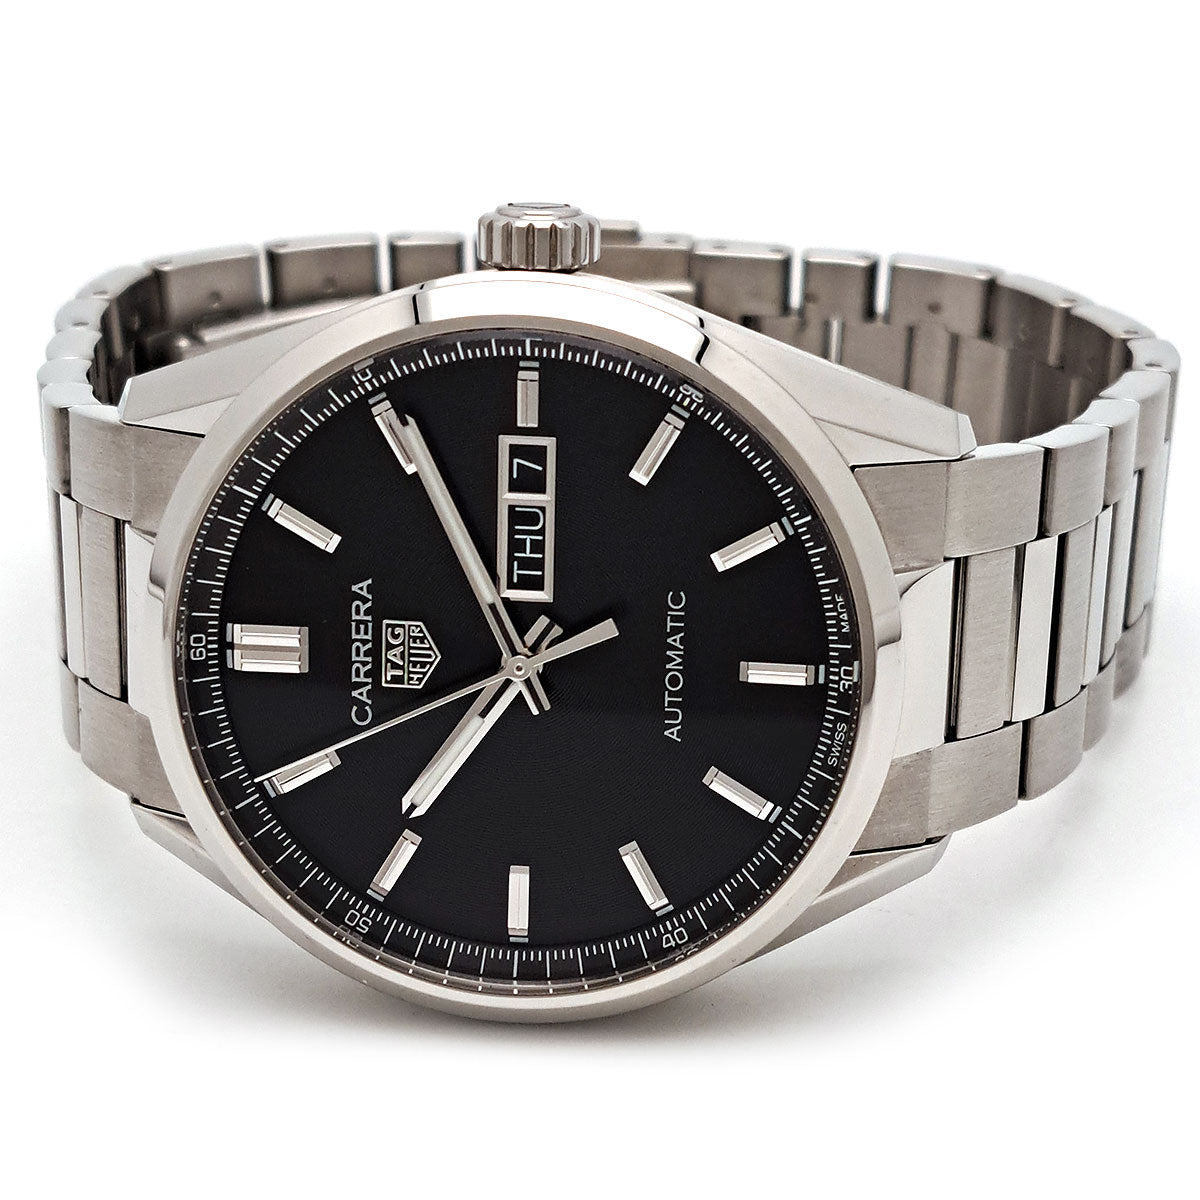 TAG HEUER Carrera Calibre 5 Day-Date WBN2010.BA0640 Automatic Stainless Steel Men’s Pre-owned Watch WBN2010.BA0640